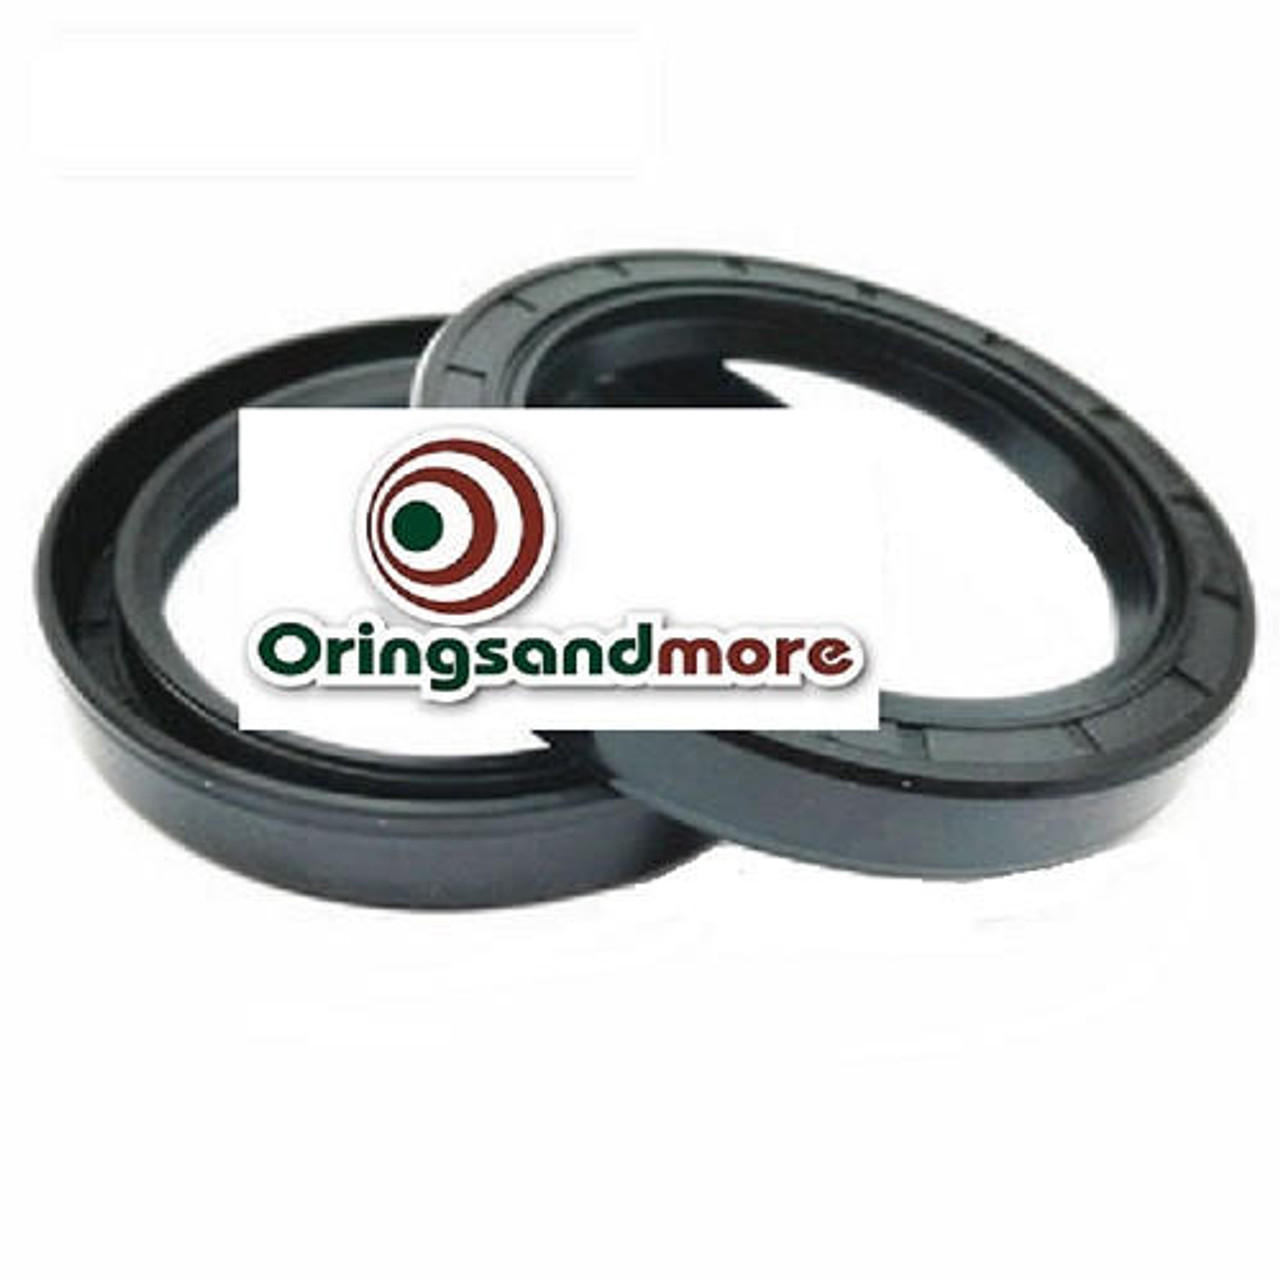 Metric Oil Shaft Seal 35 x 52 x 6mm Double Lip  Price for 1 pc